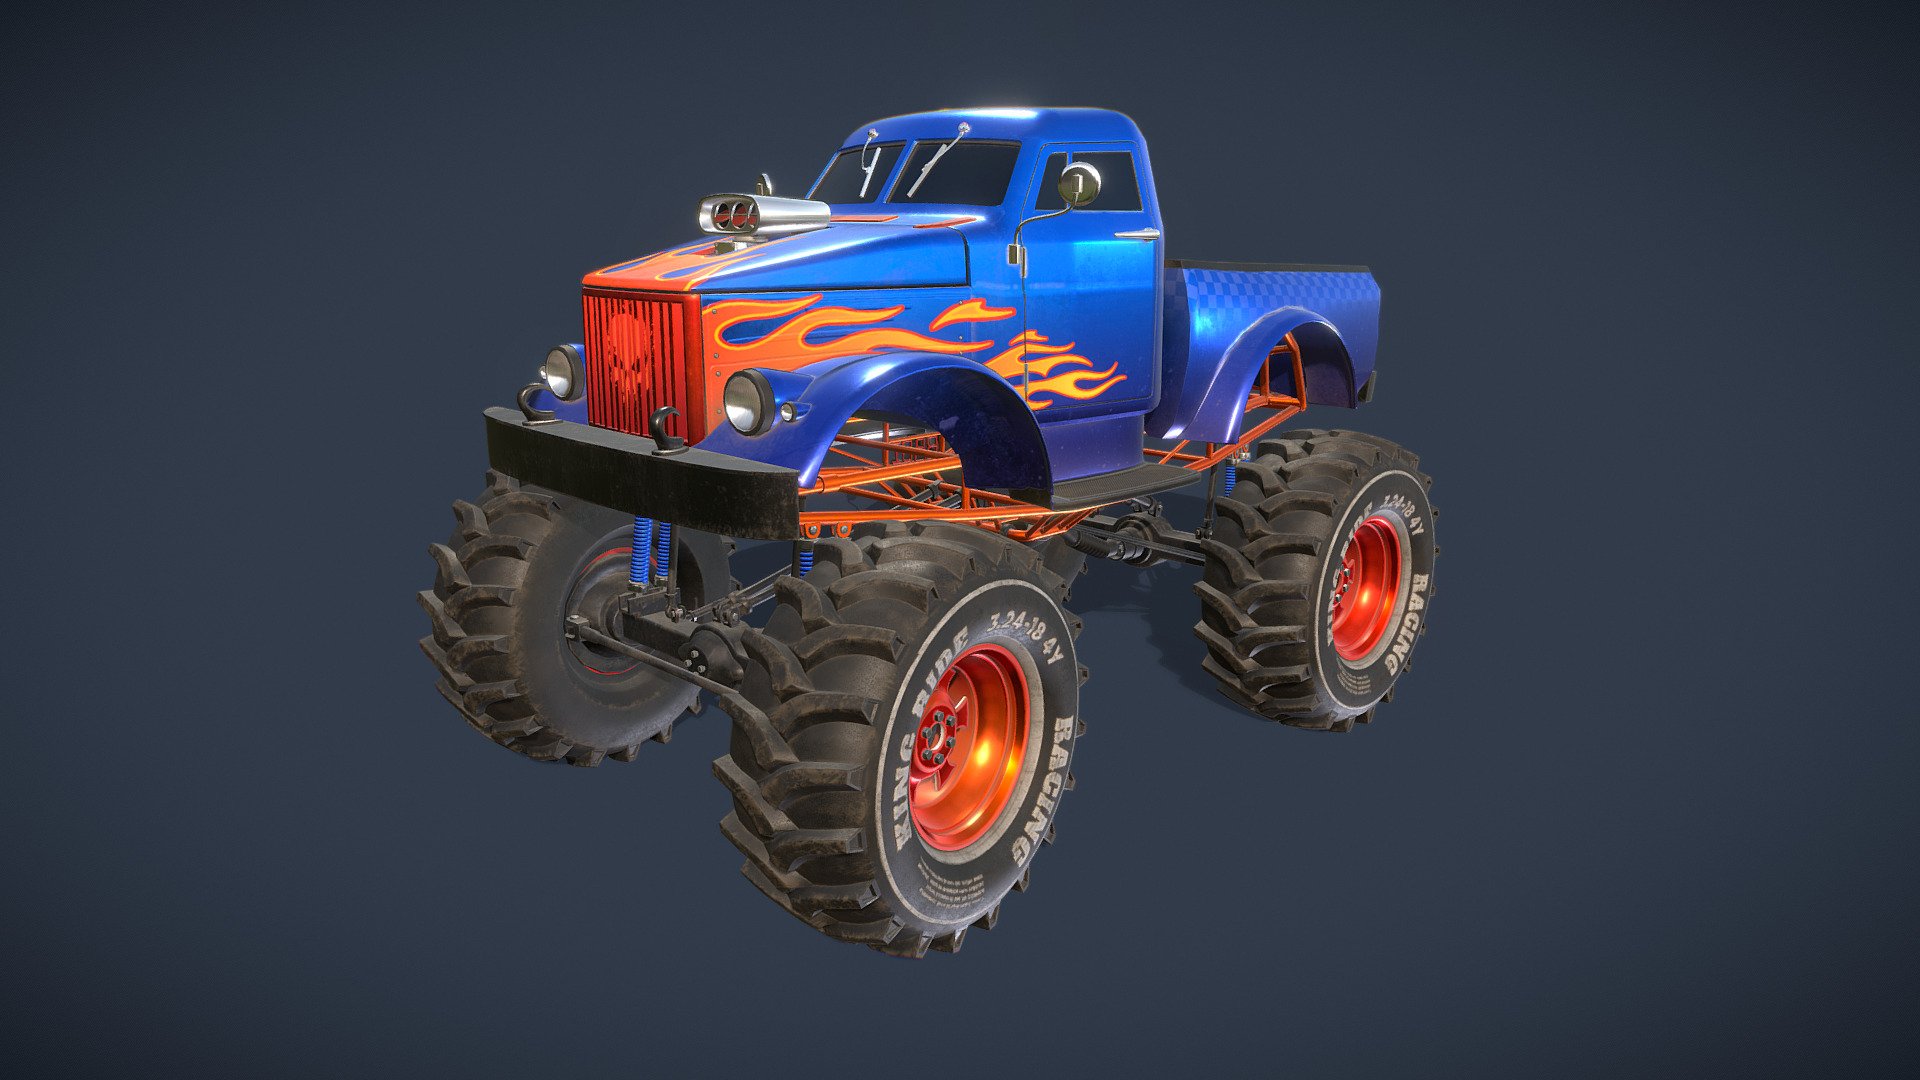 Another personal project Cartoon Monster Truck Model Inspired by Mechanick Illustration which I found on Google. The model was created in Maya, textured in Substance 3D Painter.

I hope you like it 3d model